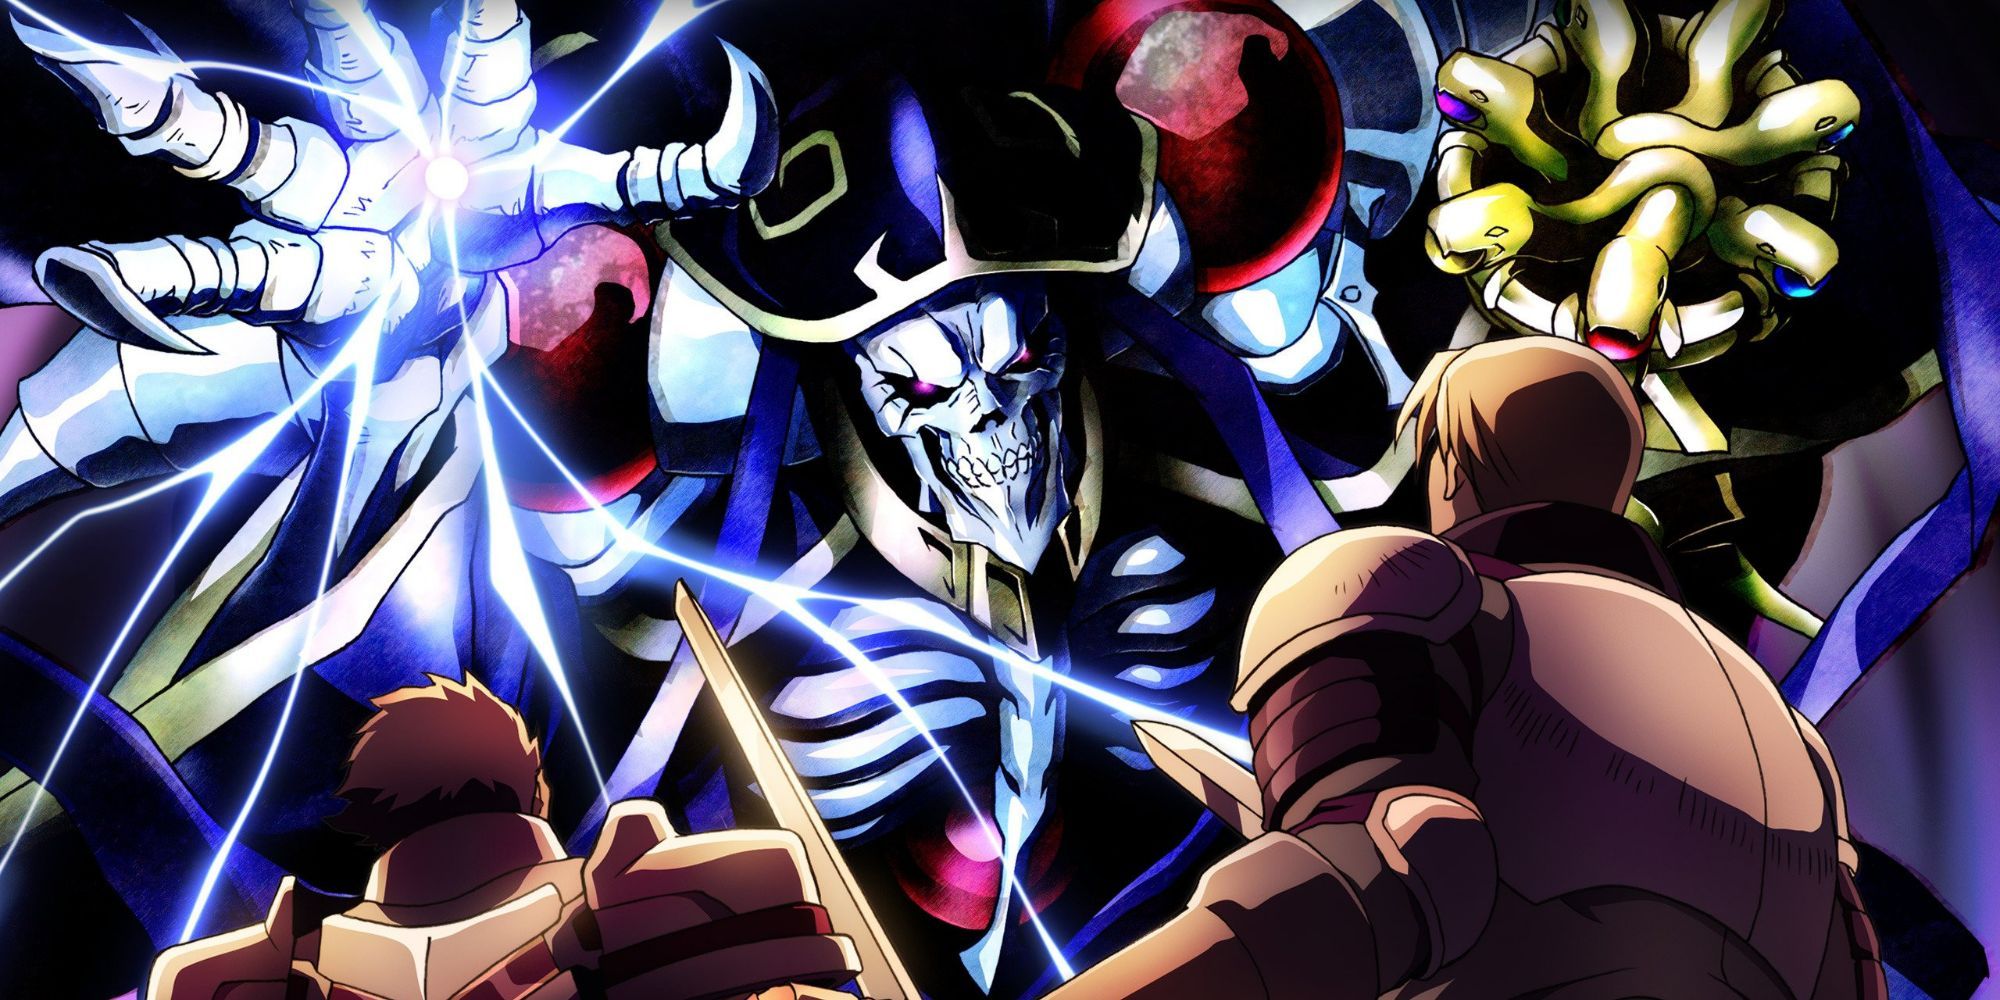 Suzuki from Overlord reaching towards knights with lightning in his hand